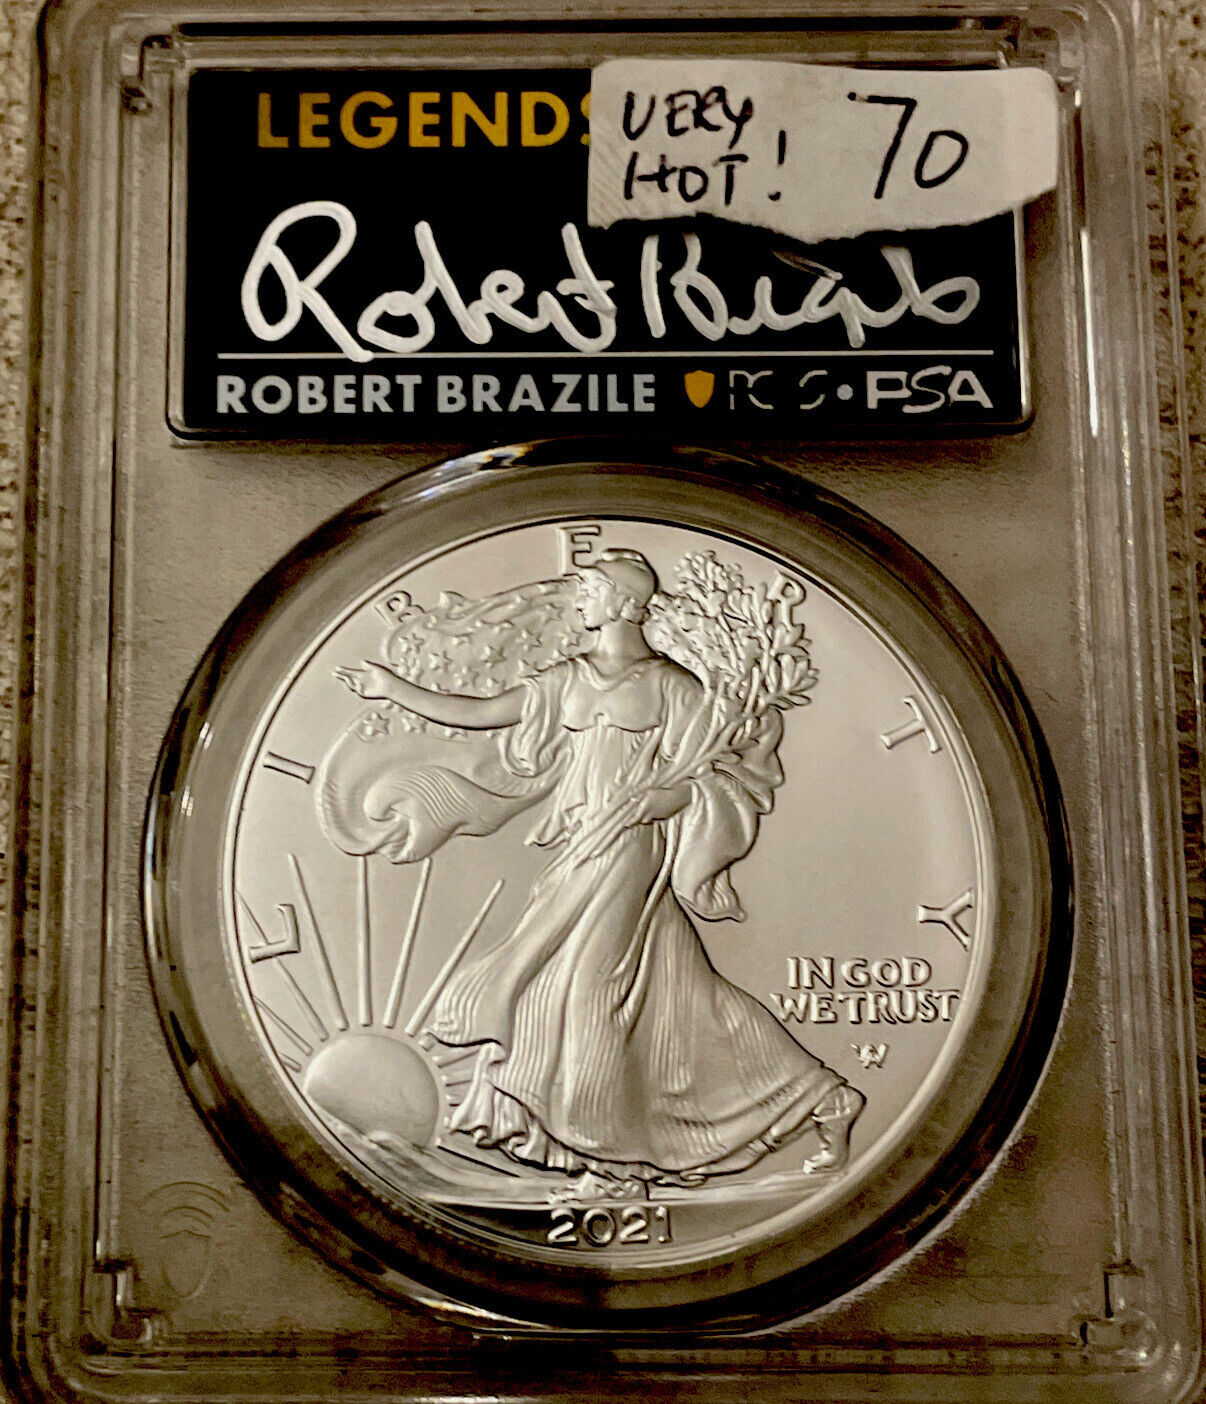 2021 w silver Eagle ty2 R Brazile First Production PCGS MS70 free S&H   Fly Flt